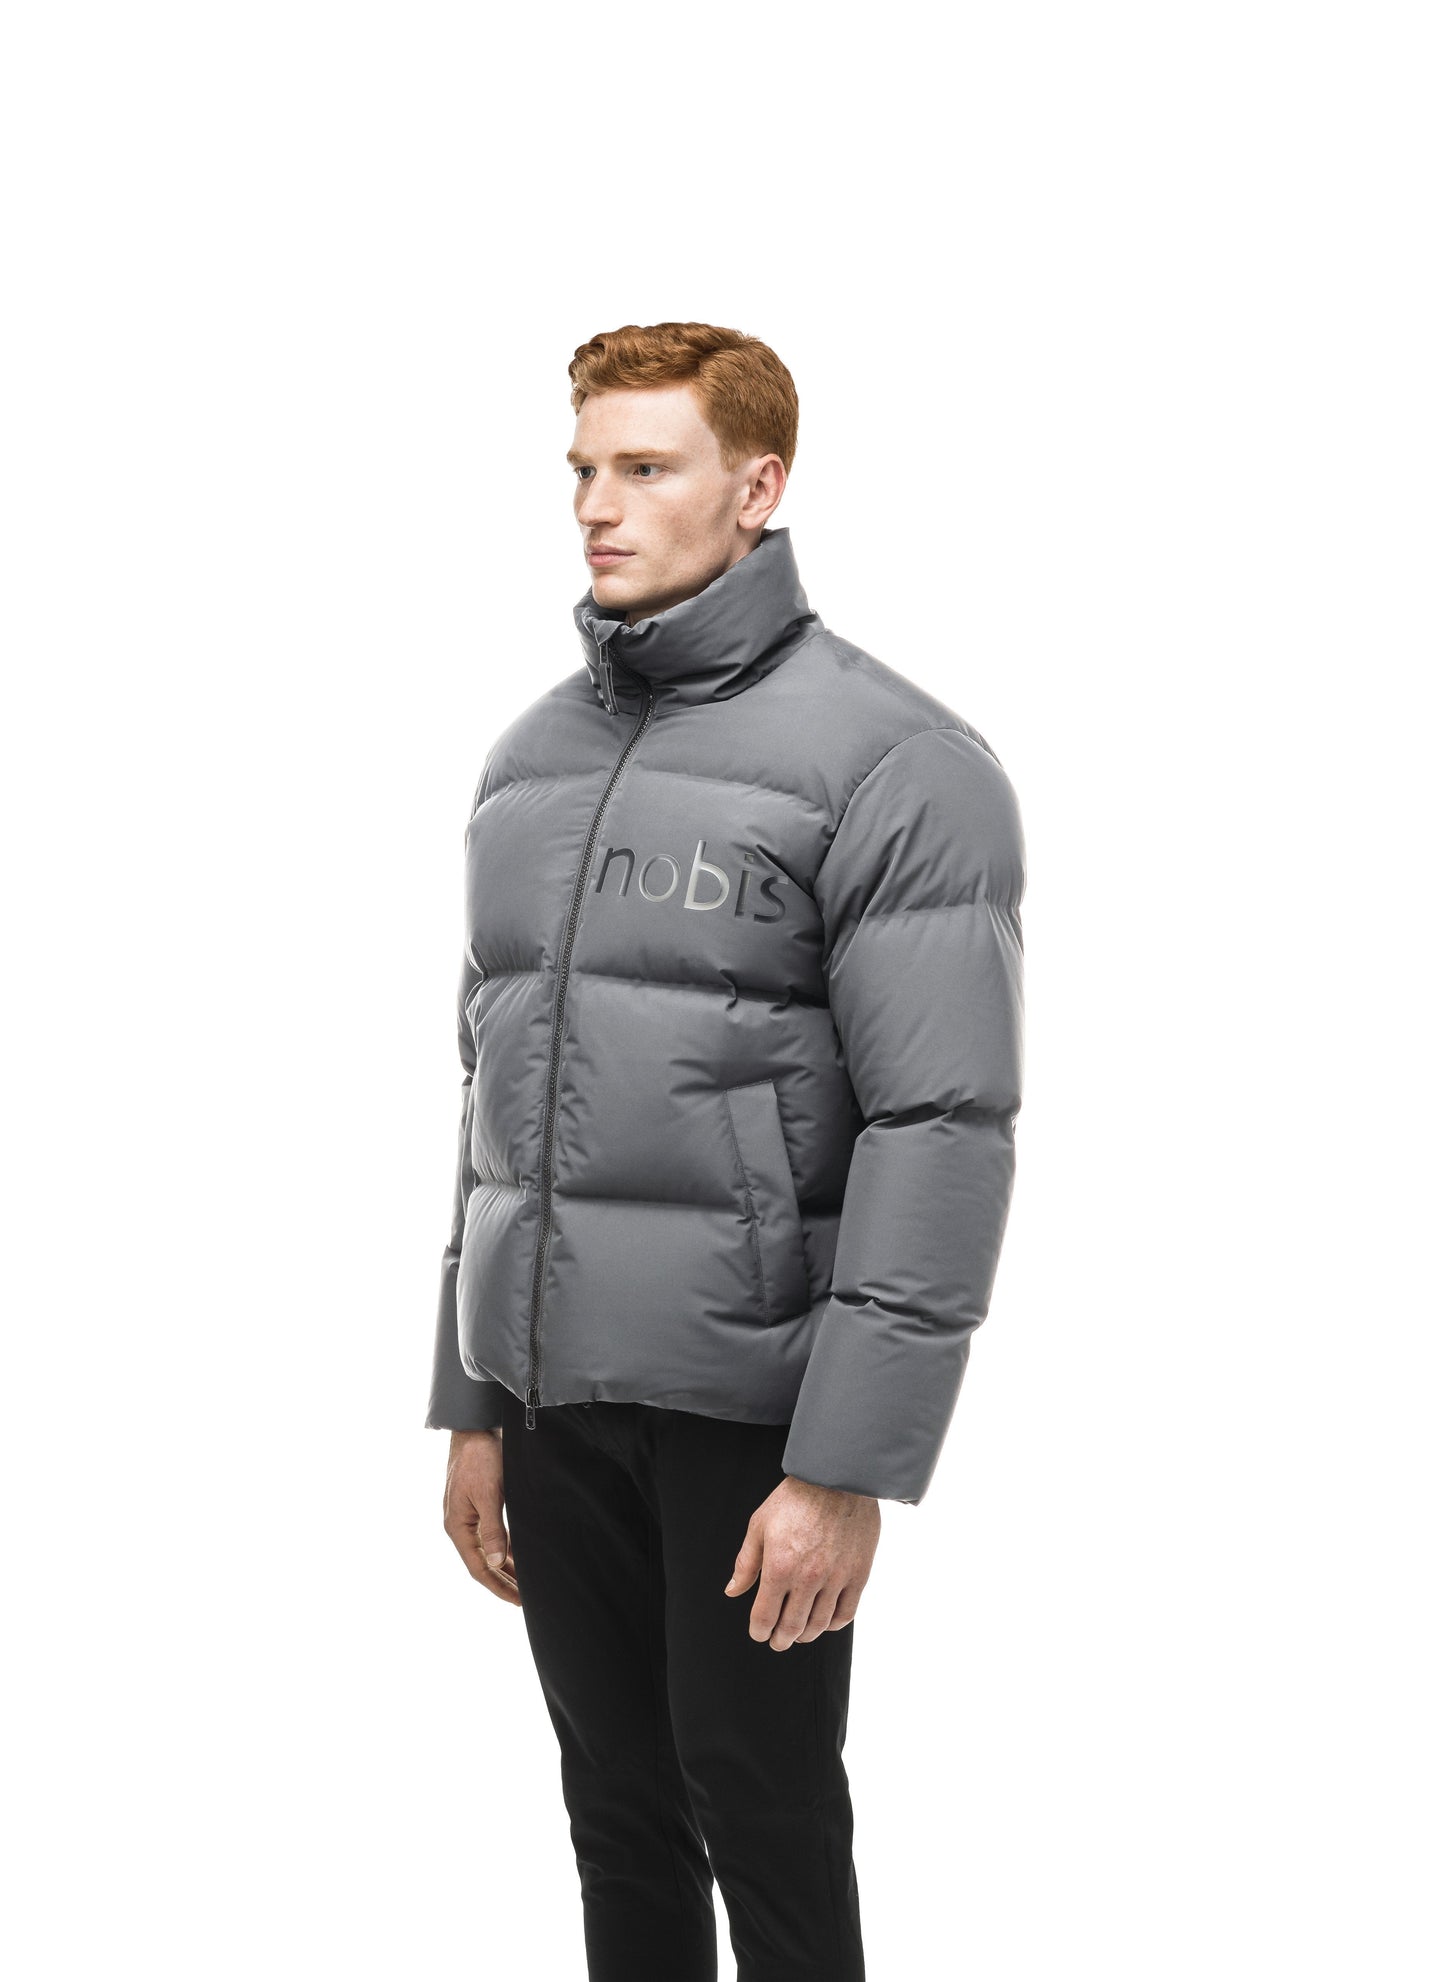 Men's puffer jacket with a minimalist modern design; featuring graphic details like oversized tonal branding, an exposed zipper, and seamless puffer channels in Concrete